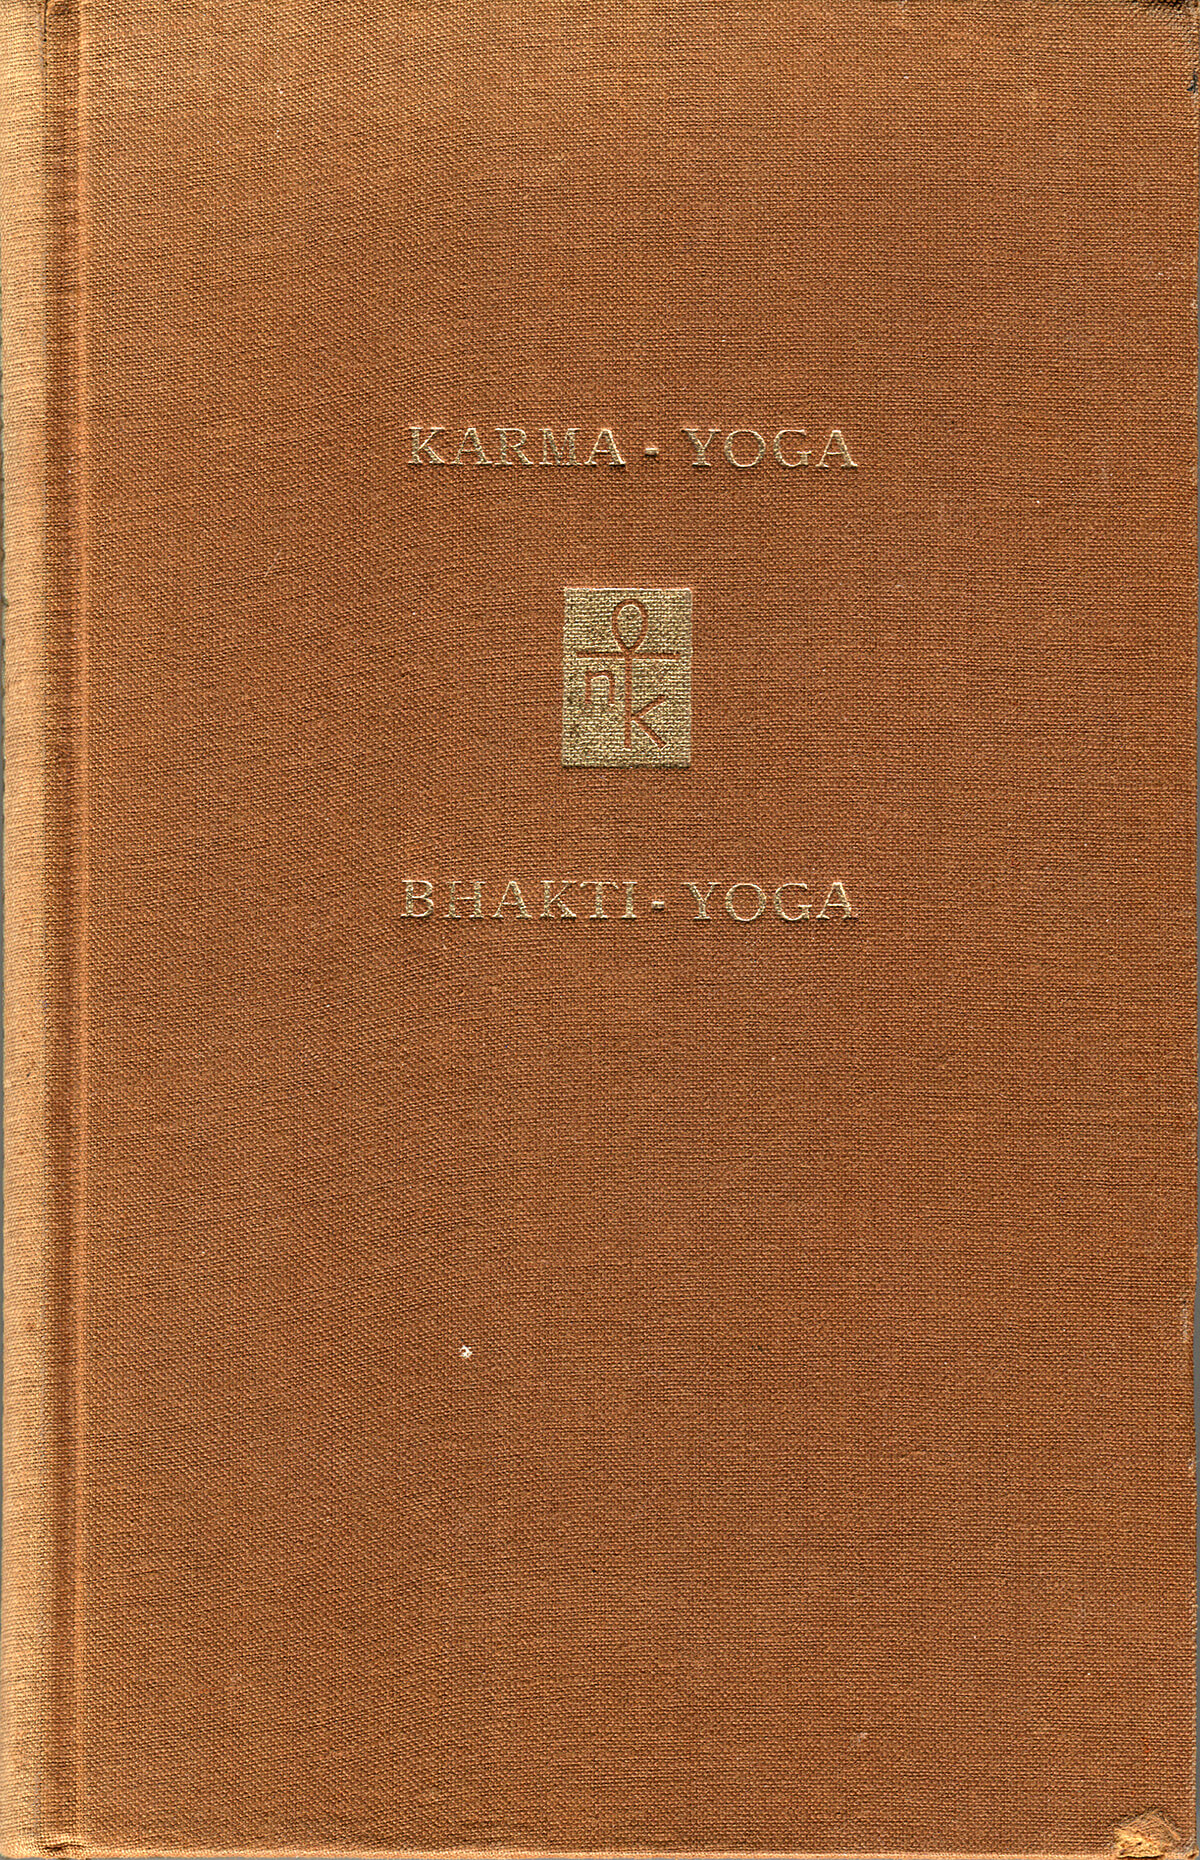 Yoga book, cover, 204 pages, 21 x 13.5 cm, 1989